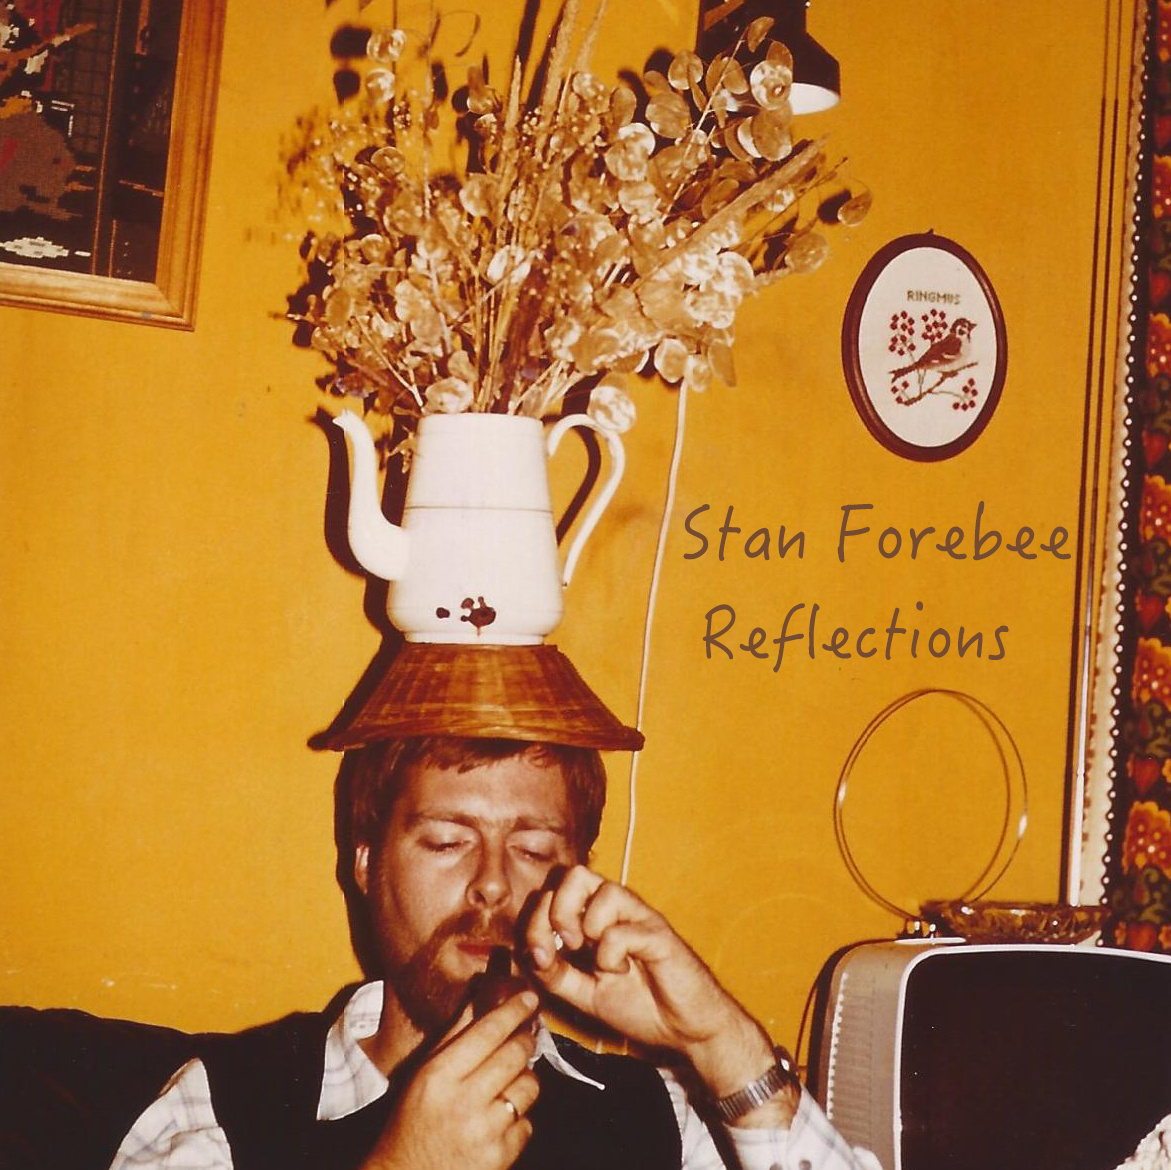 Stan Forebee "Reflections" Release | @stanforebee @DigiCrates